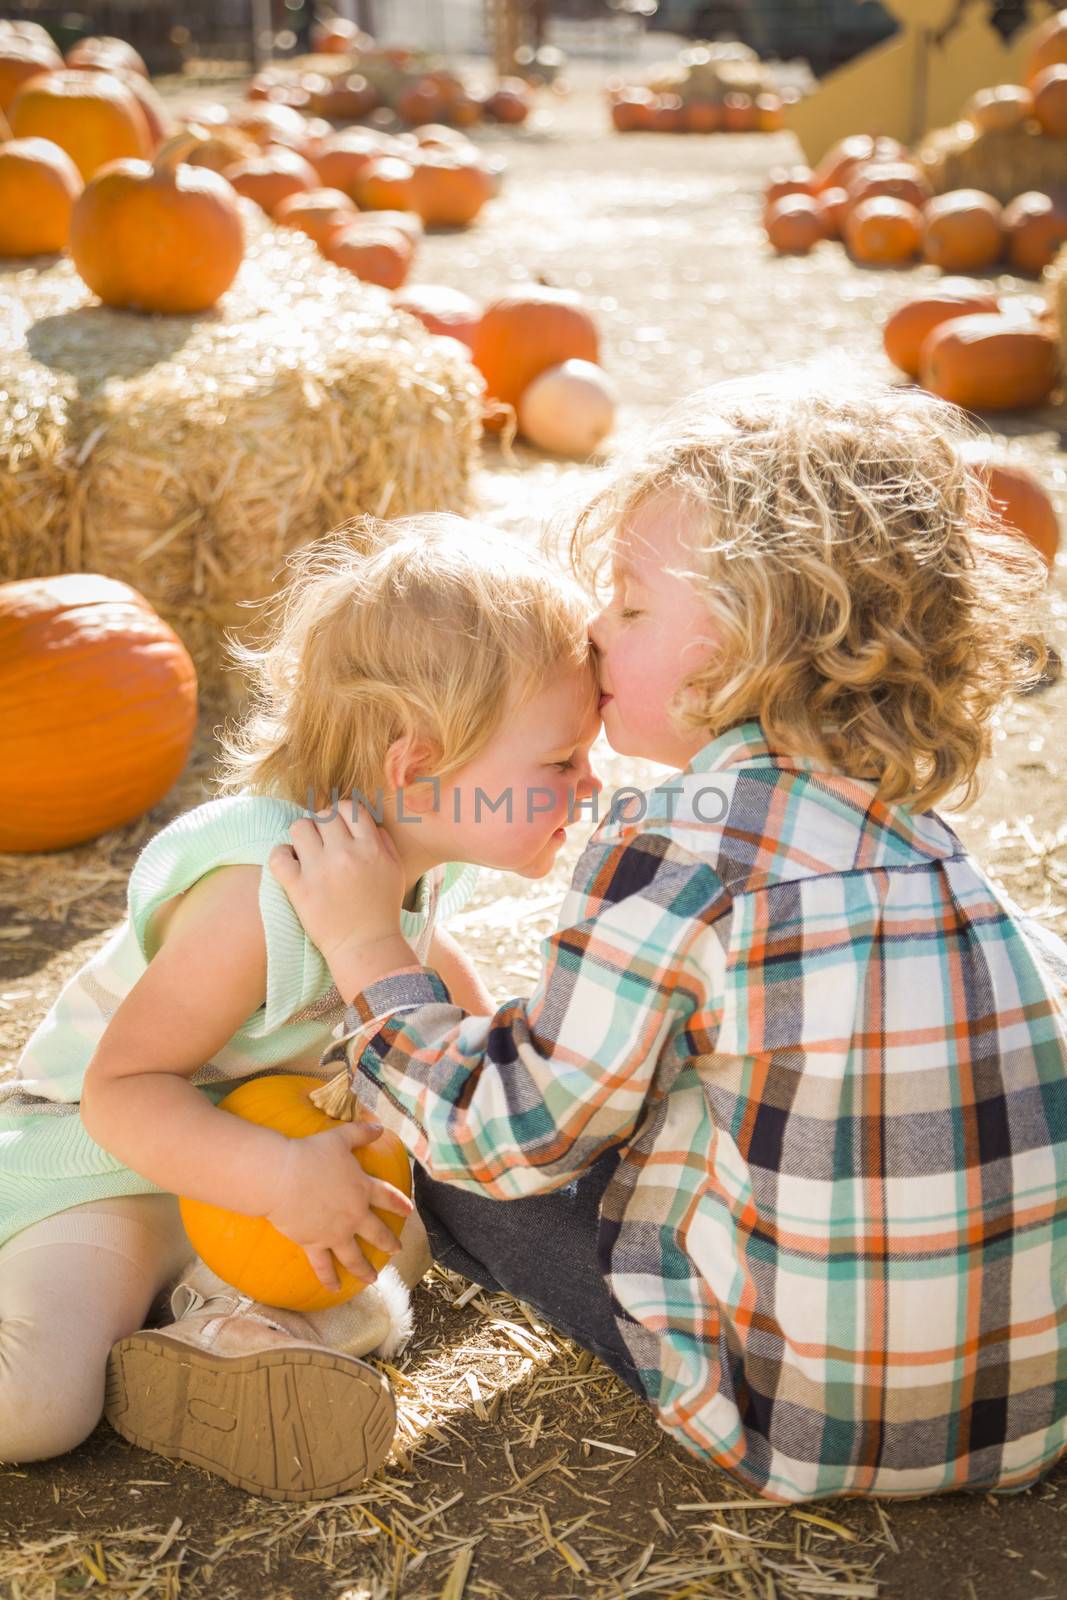 Sweet Little Boy Kisses His Baby Sister at Pumpkin Patch
 by Feverpitched